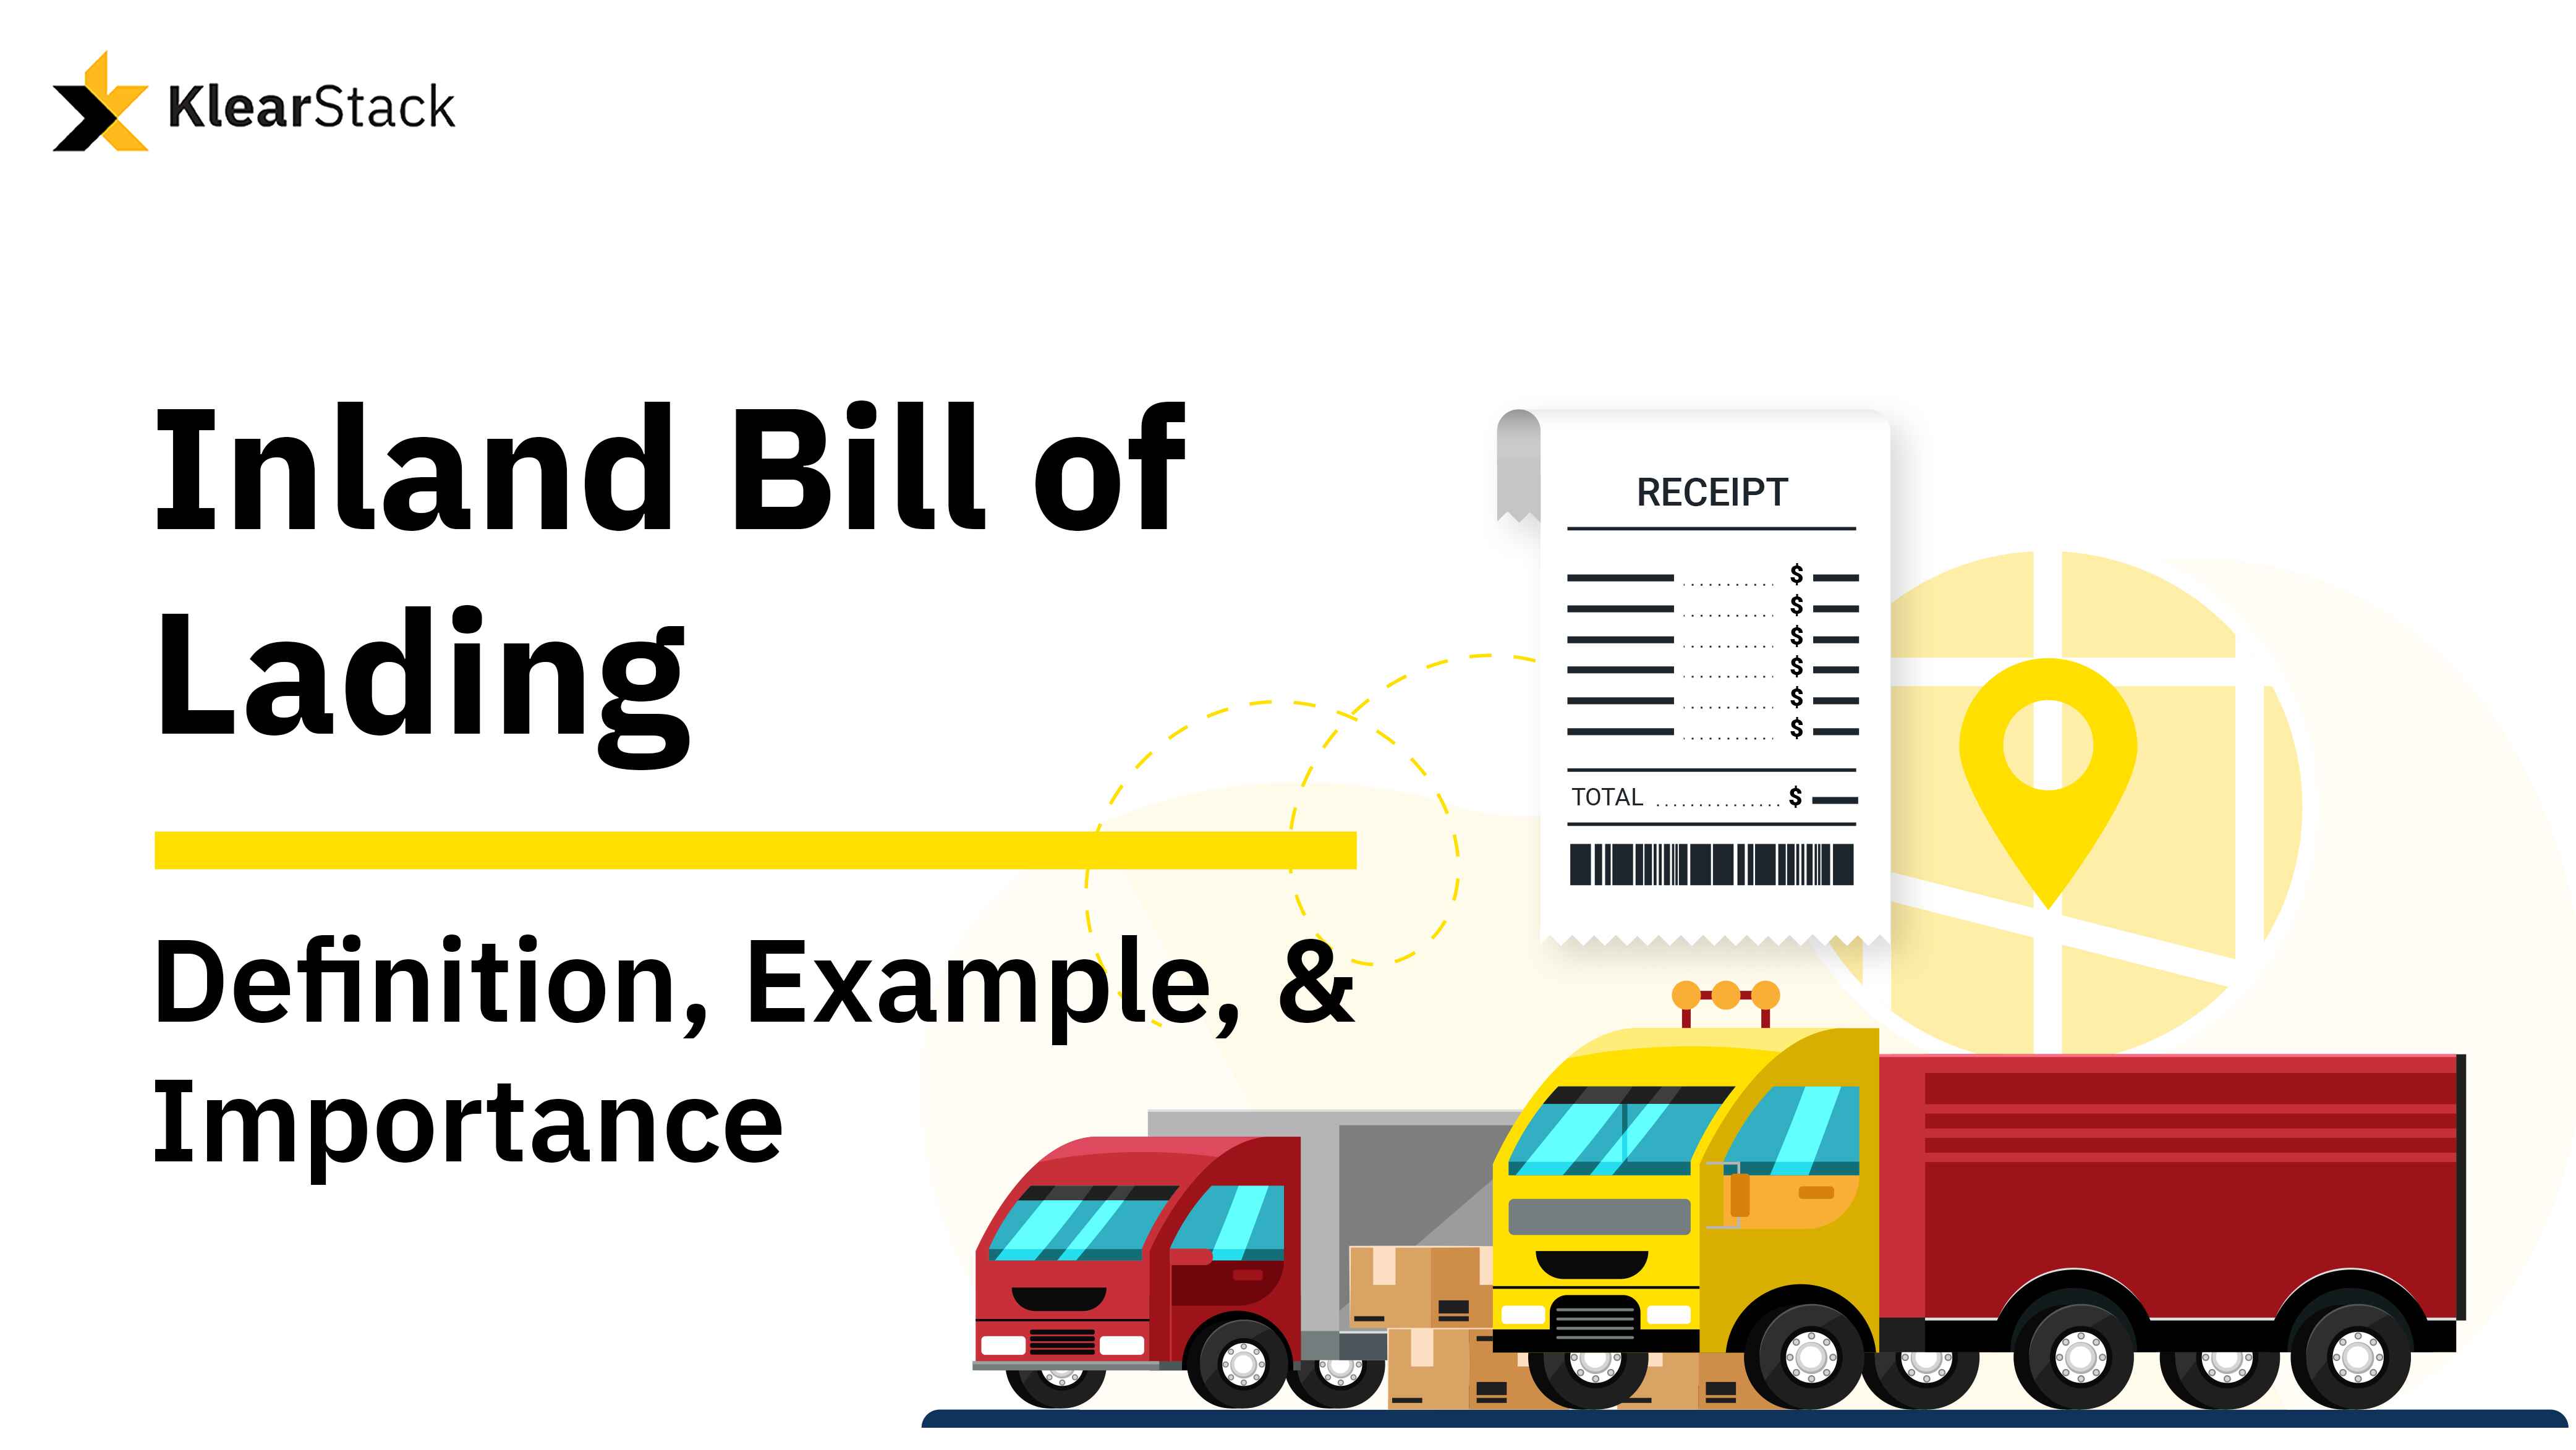 Inland Bill of Lading: Definition, Example, Importance